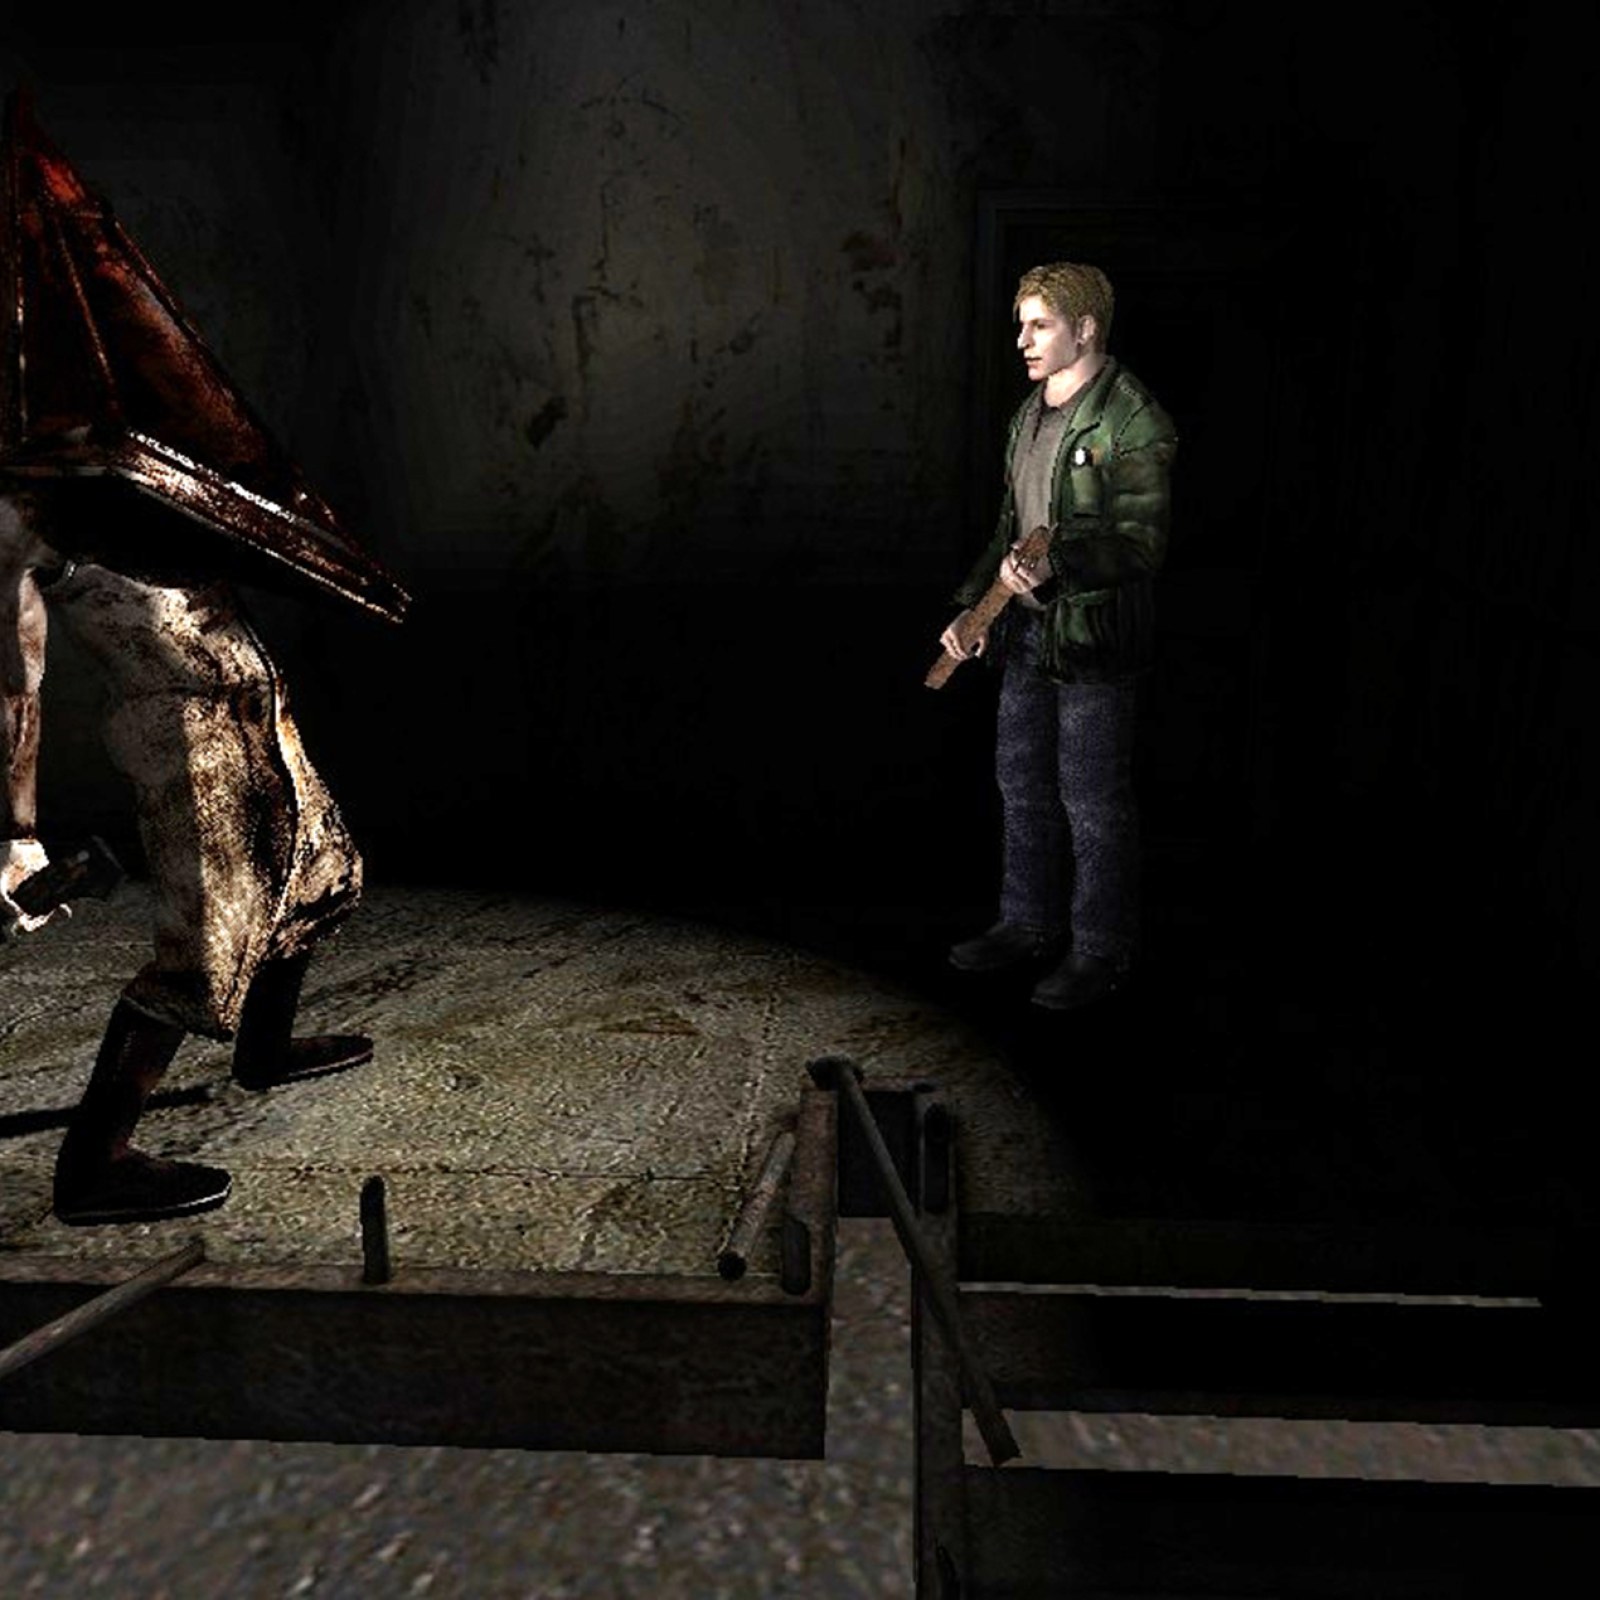 Silent Hill 2 Remake Looks Likely As Official Livestream Confirmed